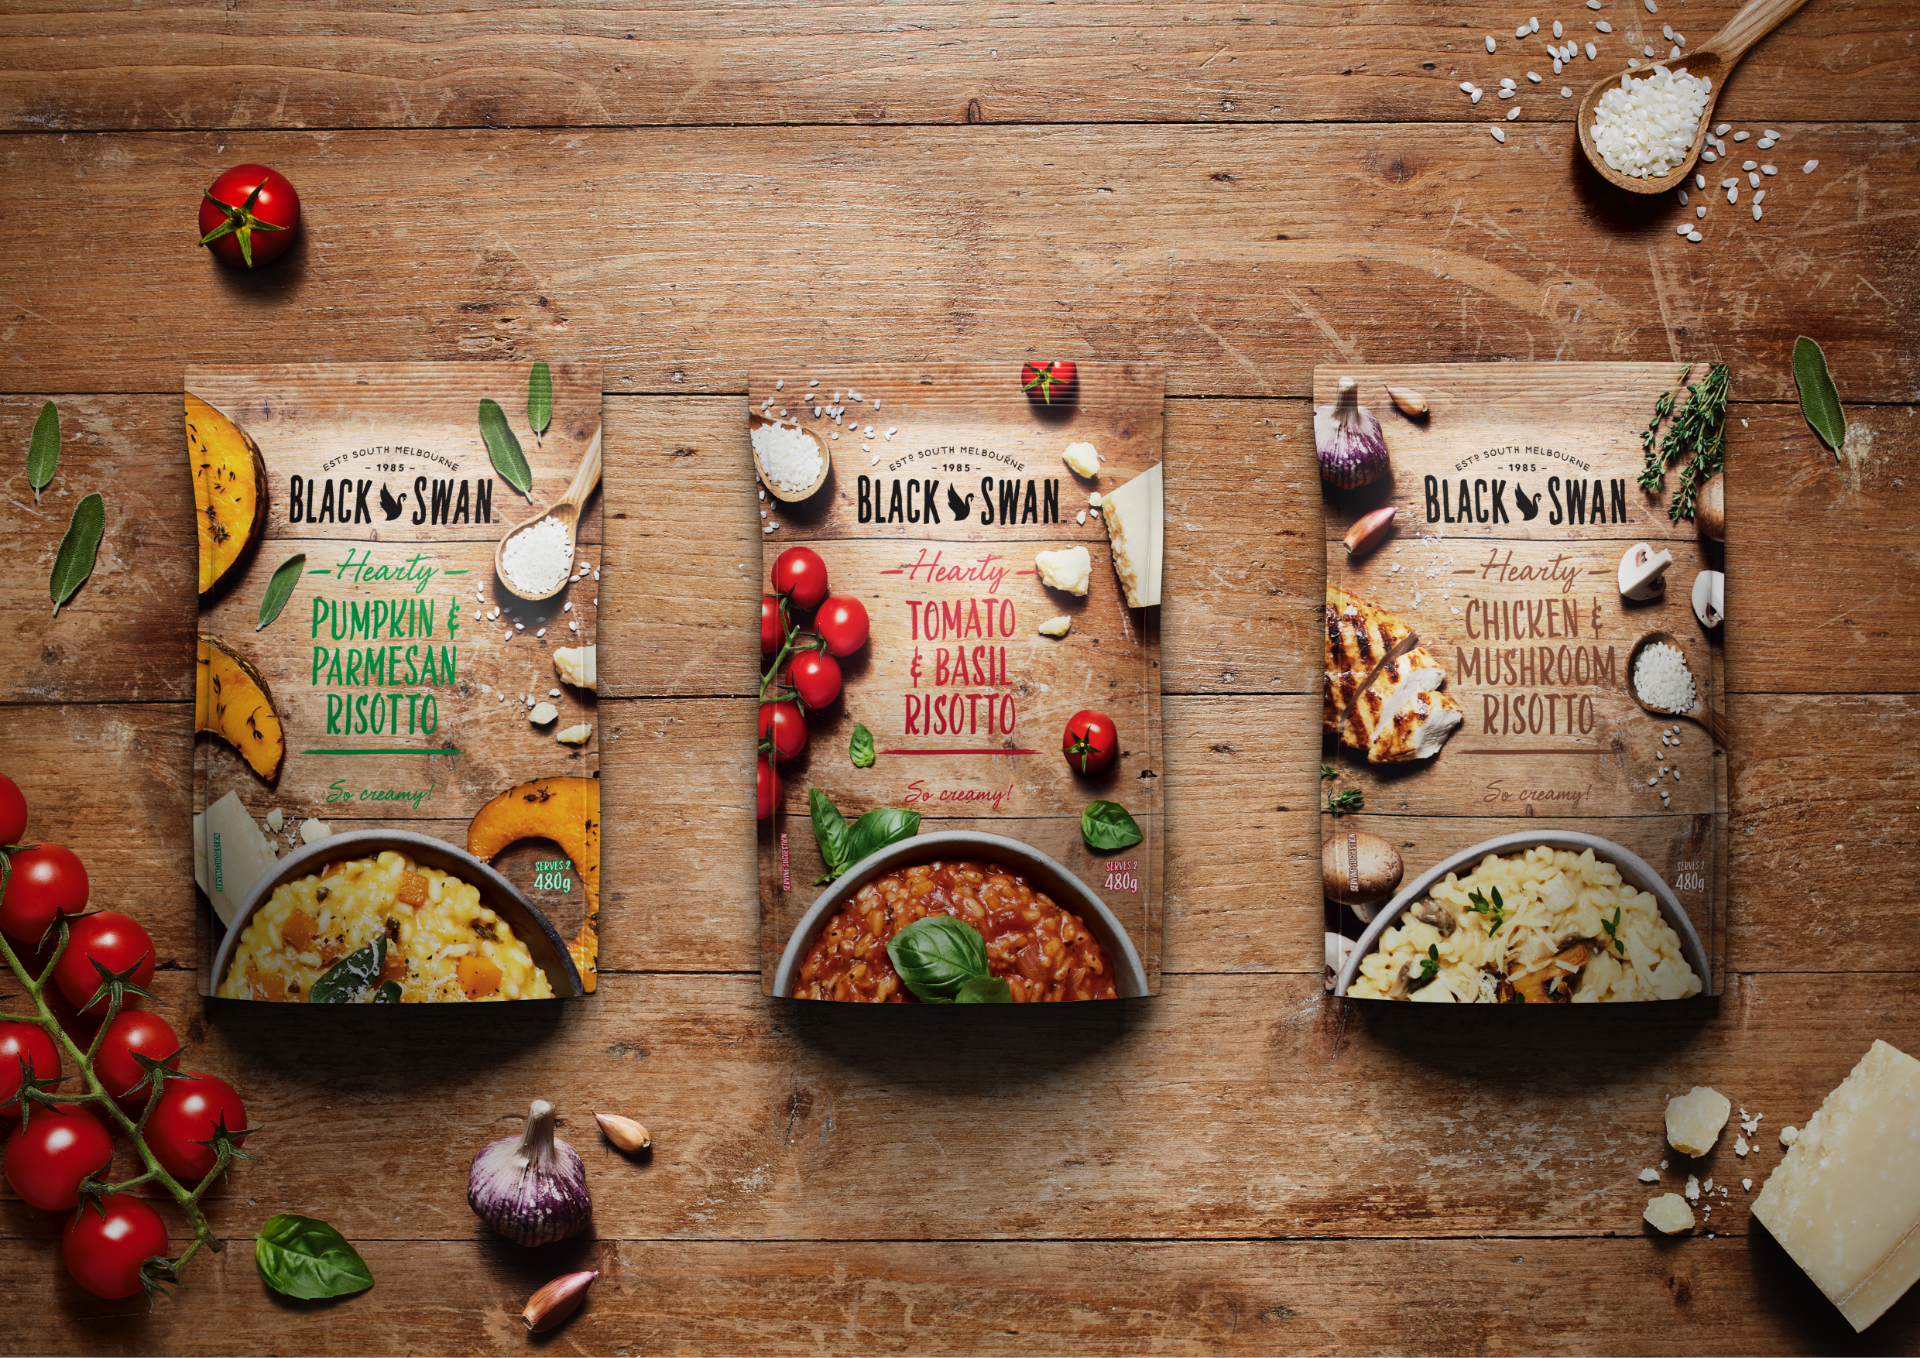 Black Swan Hearty Risotto packaging range, surrounded by various raw ingredients on a wooden table.